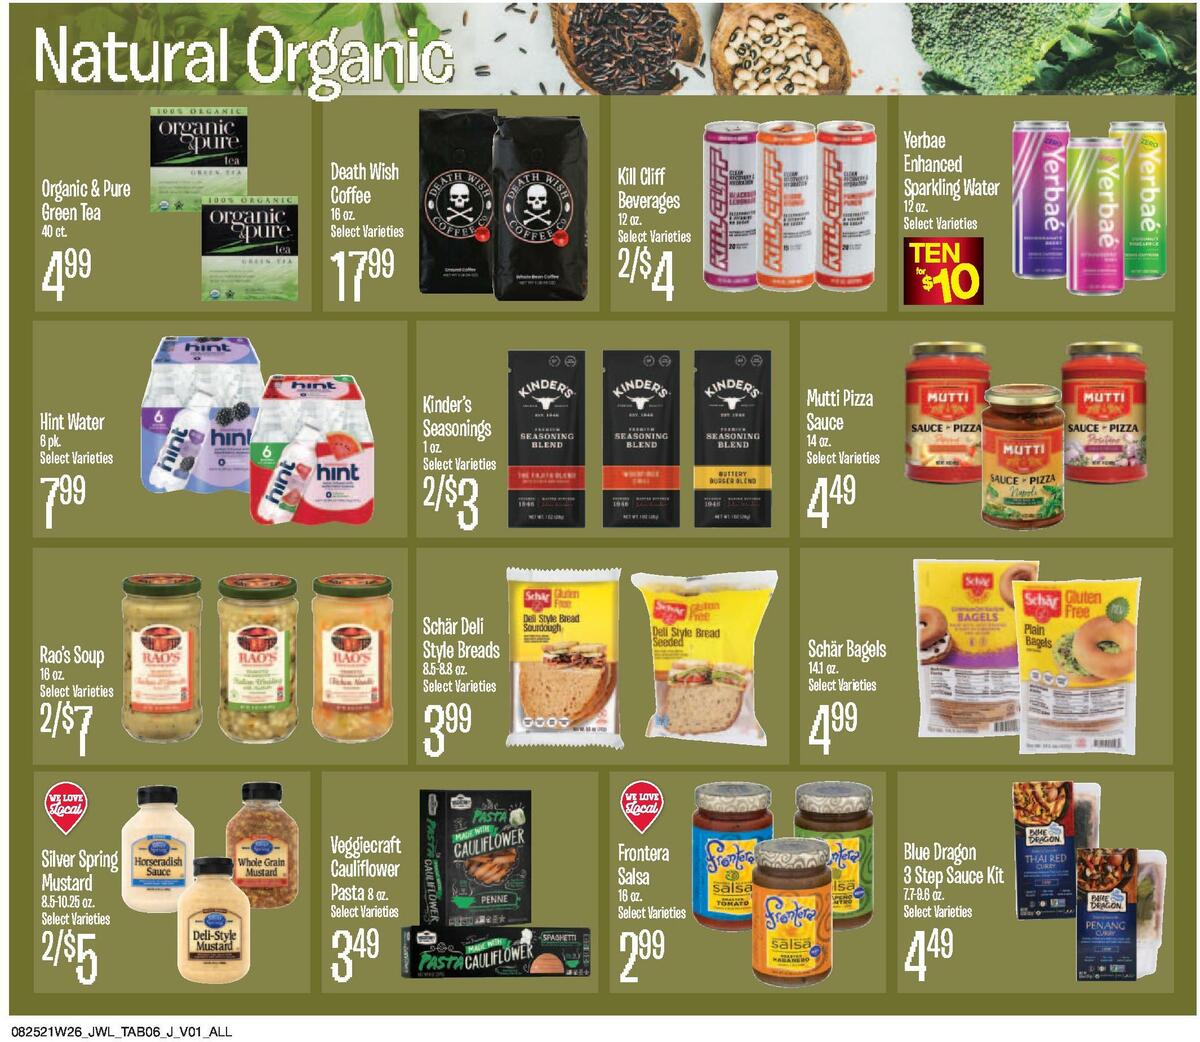 Jewel Osco Natural & Organic Weekly Ad from August 25